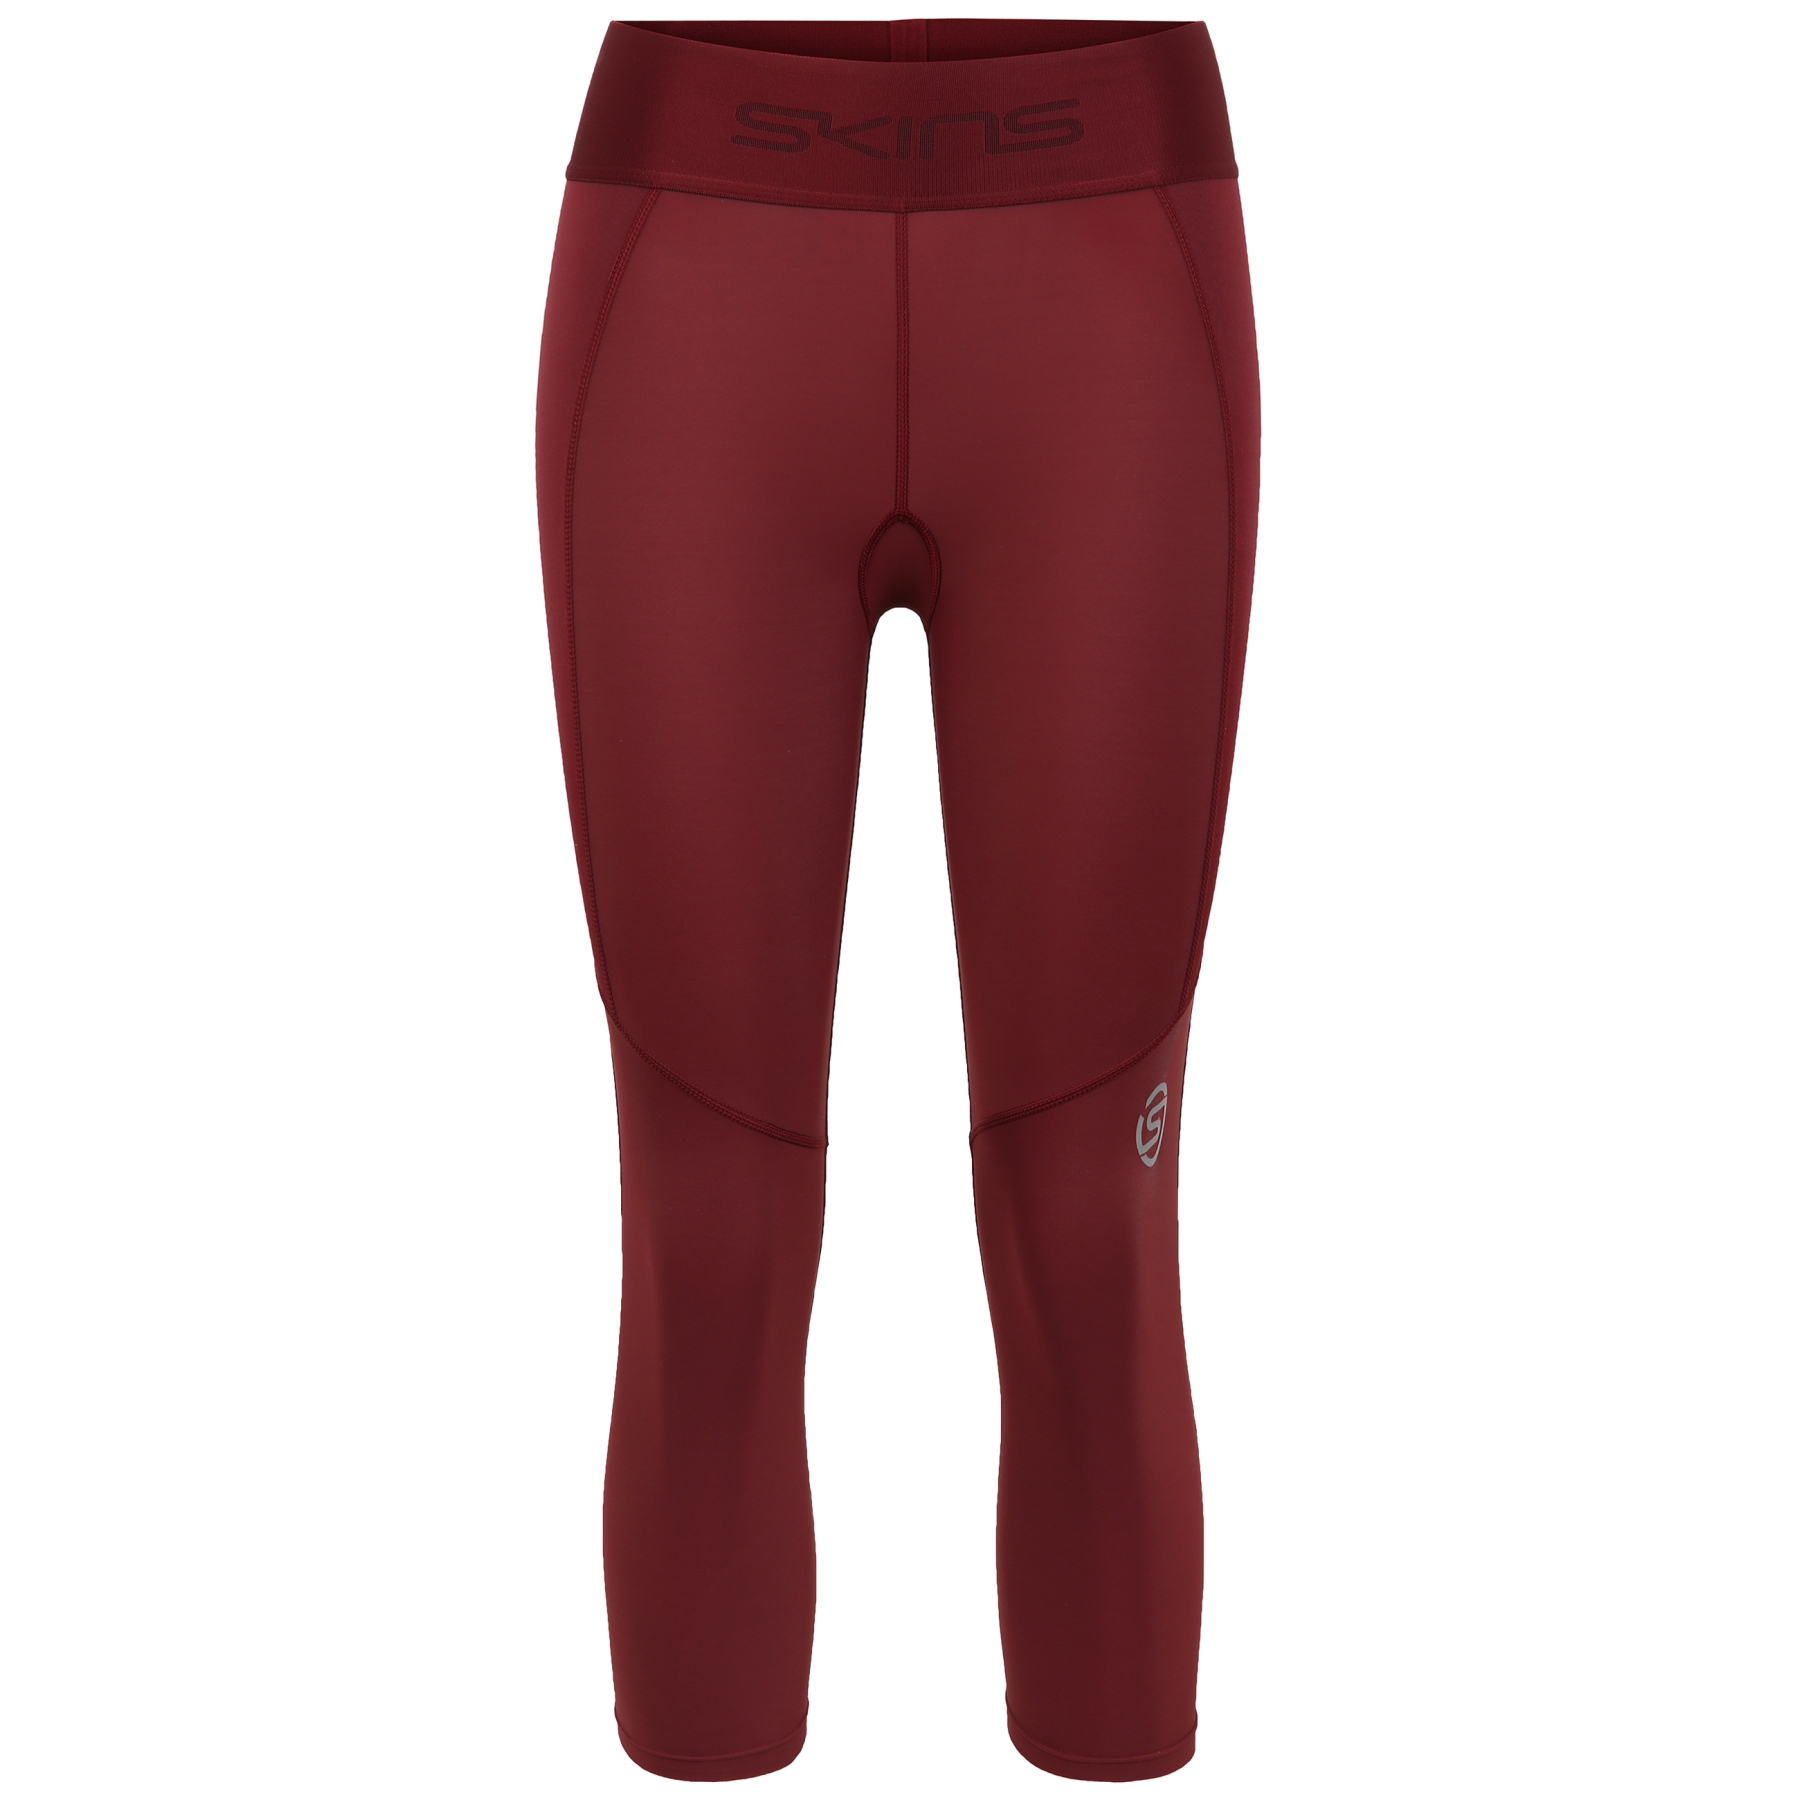 Image of SKINS Compression 3-Series Thermal 3/4 Tights Women - Burgundy